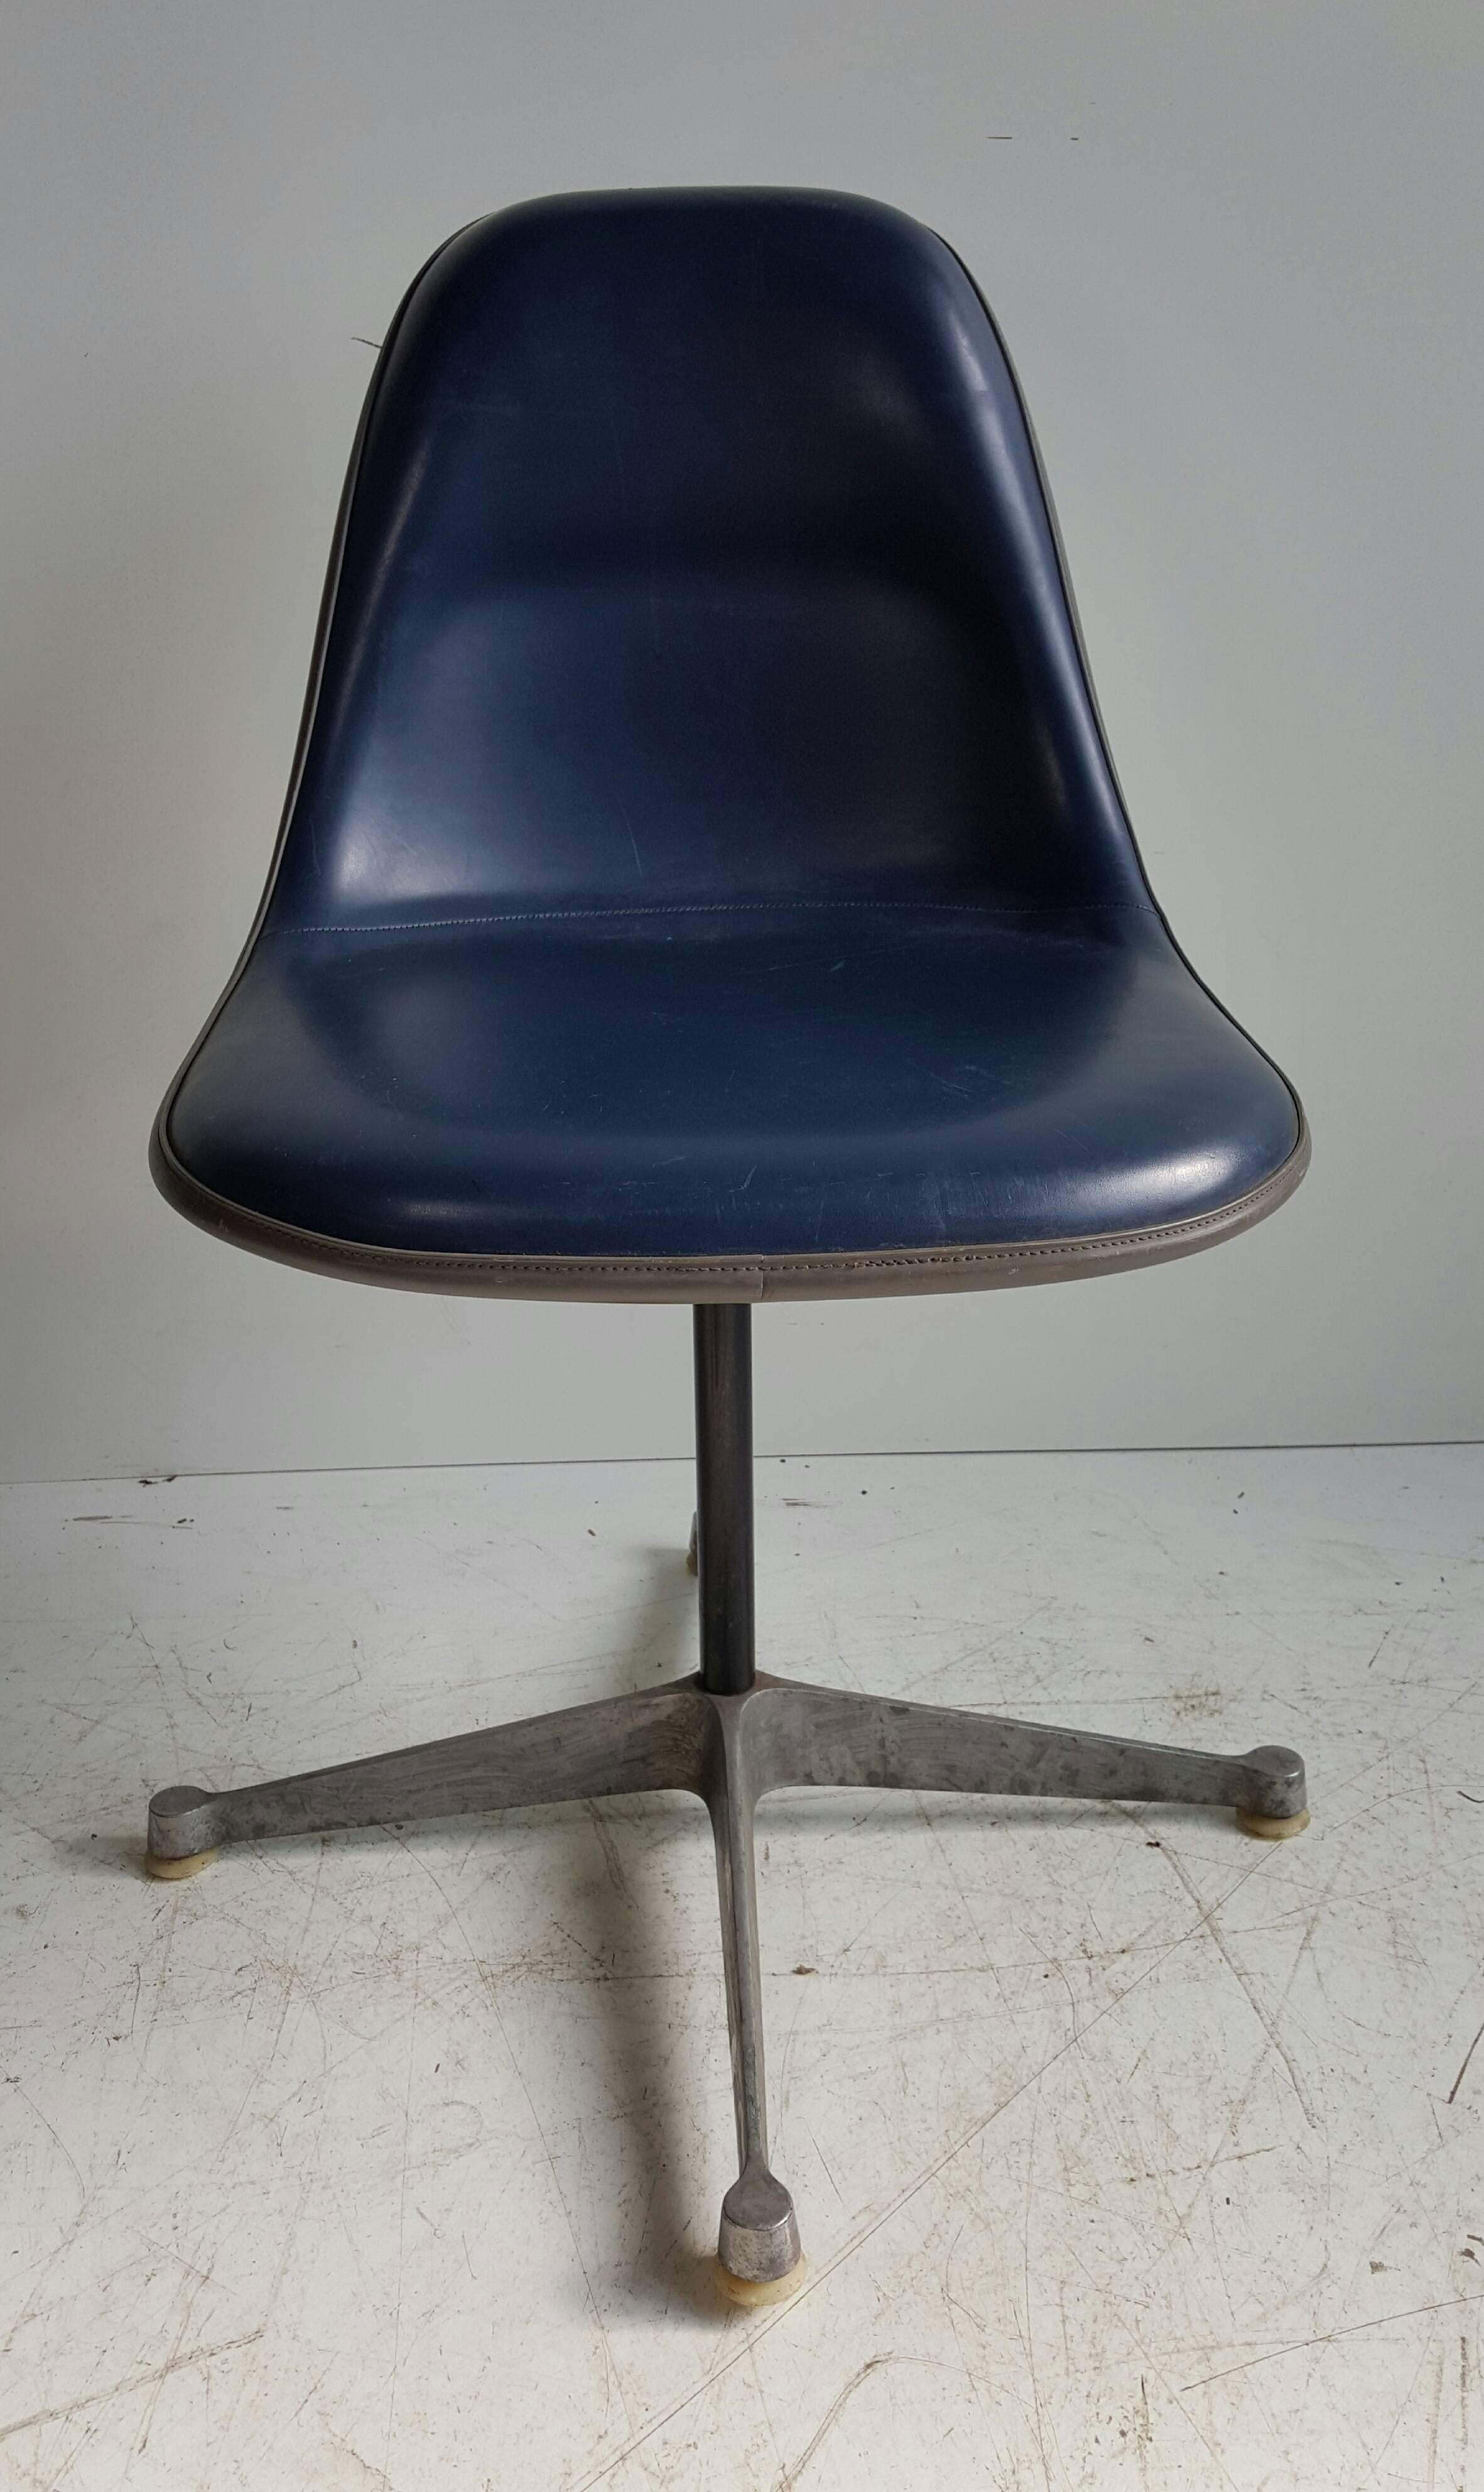 Rare PSCC desk chair designed by Charles & Ray Eames for Herman Miller Secretary chair with original Royal Blue Naugahyde. Chair fully swivels and features double pad (upper) for ultimate comfort, this chair was produced for a short time. Retains